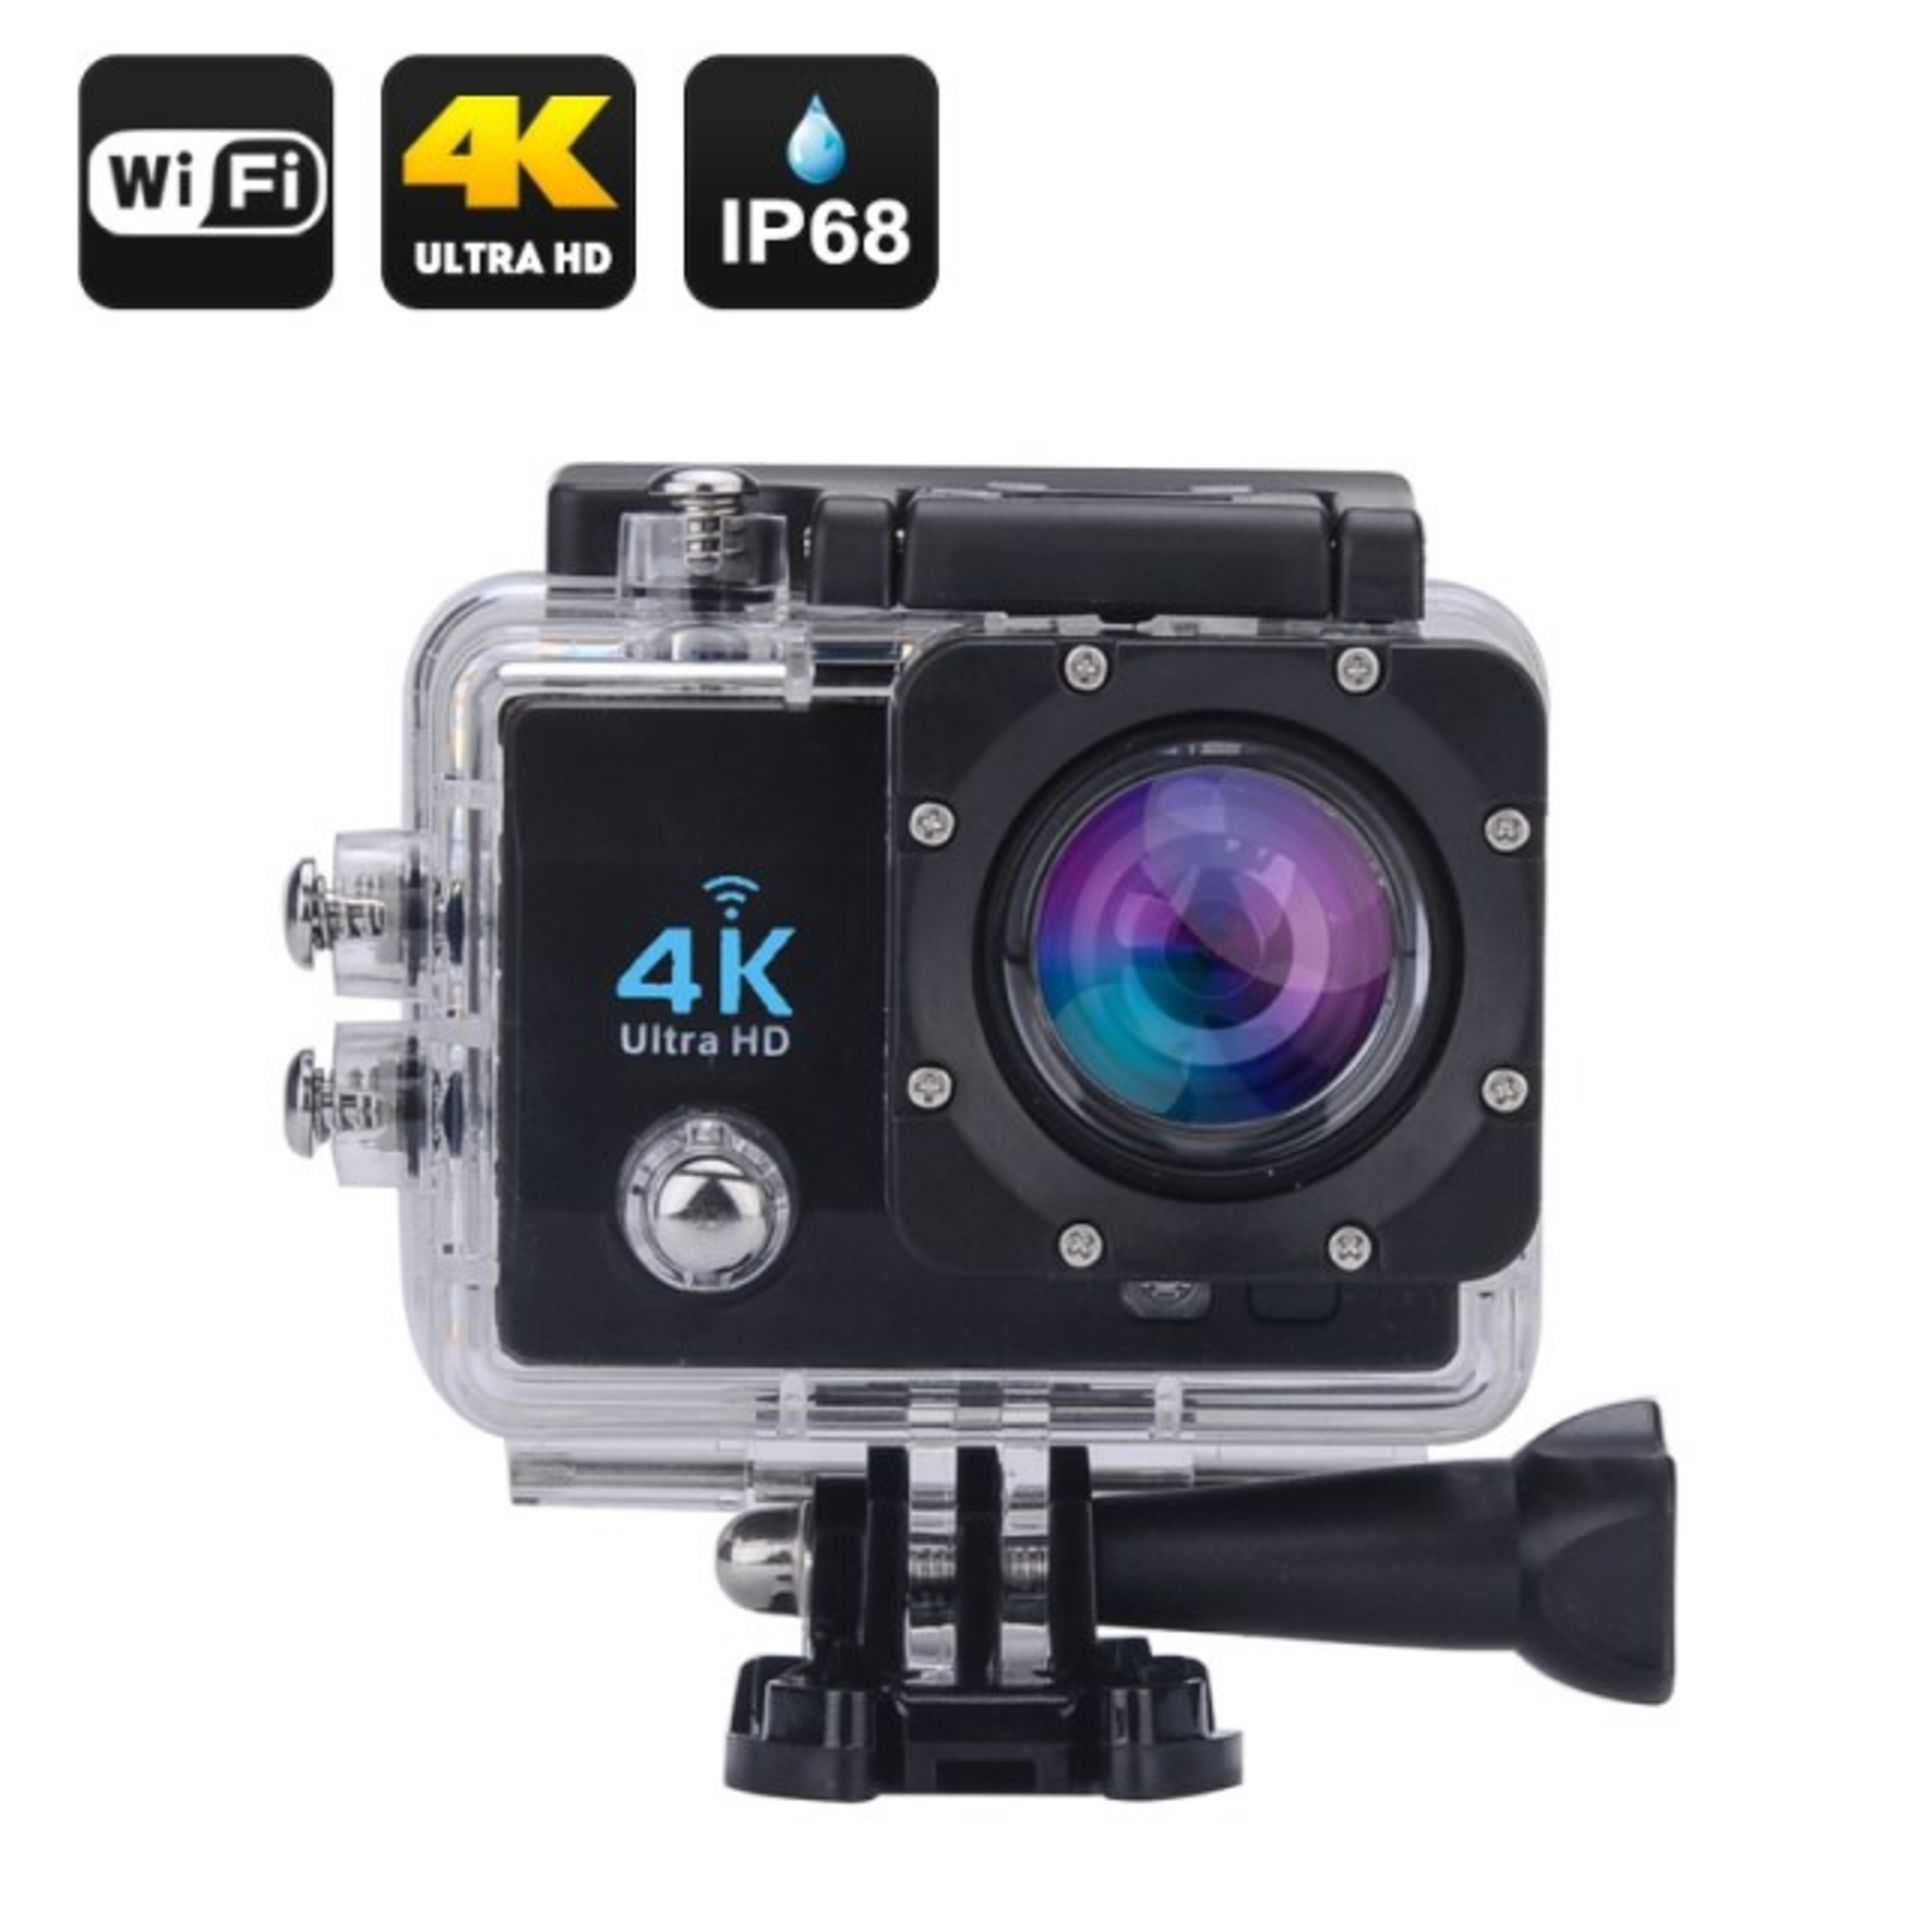 No VAT Brand New Full Ultra HD 4K Waterproof WiFi Action Camera With Audio - Box And Accessories -